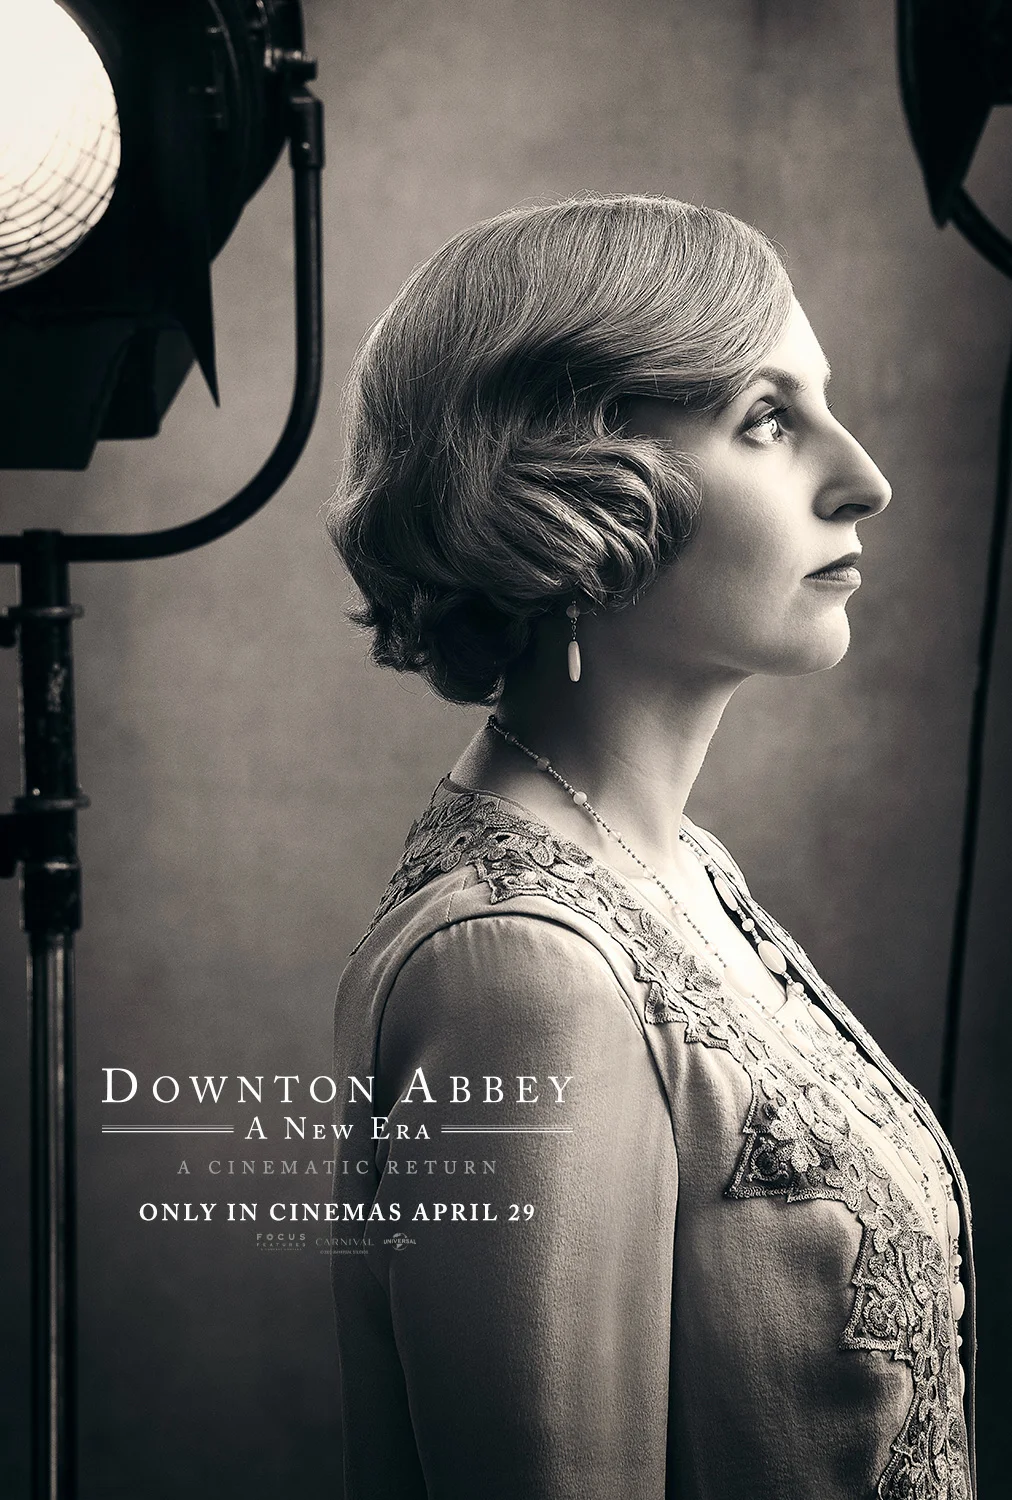 downton-abbey-a-new-era-released-character-posters-multiple-main-actors-appear-3